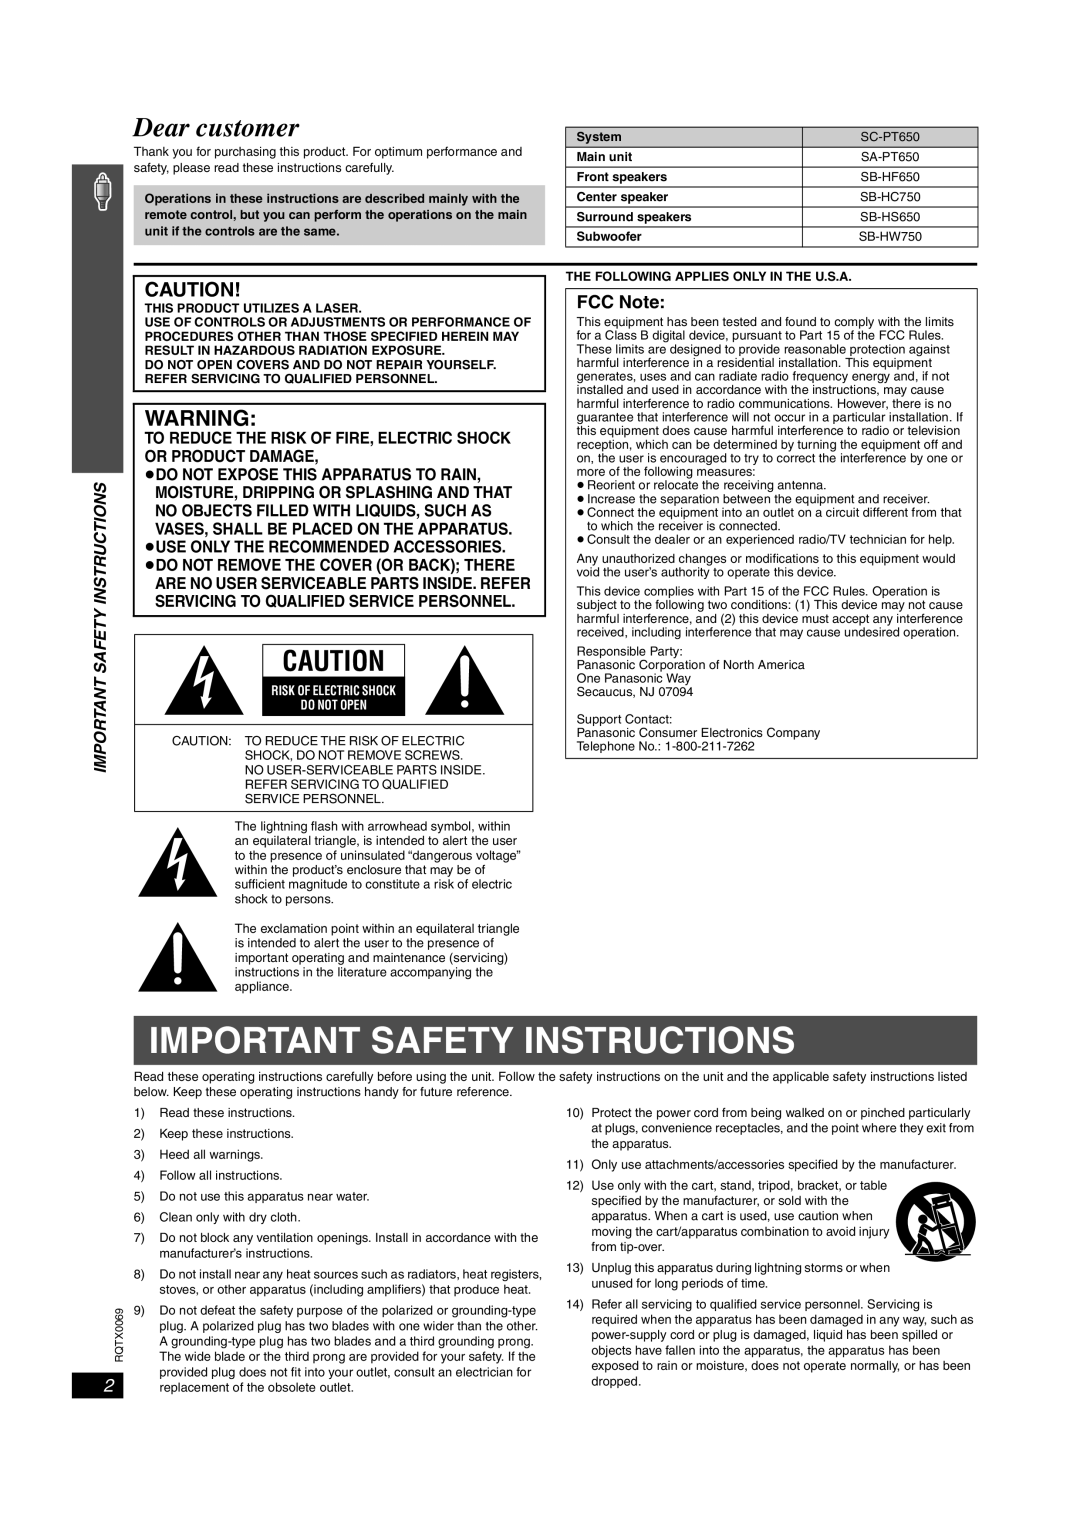 Panasonic SC-PT650 operating instructions FCC Note, Important Safety Instructions, ≥Do Not Expose This Apparatus To Rain 